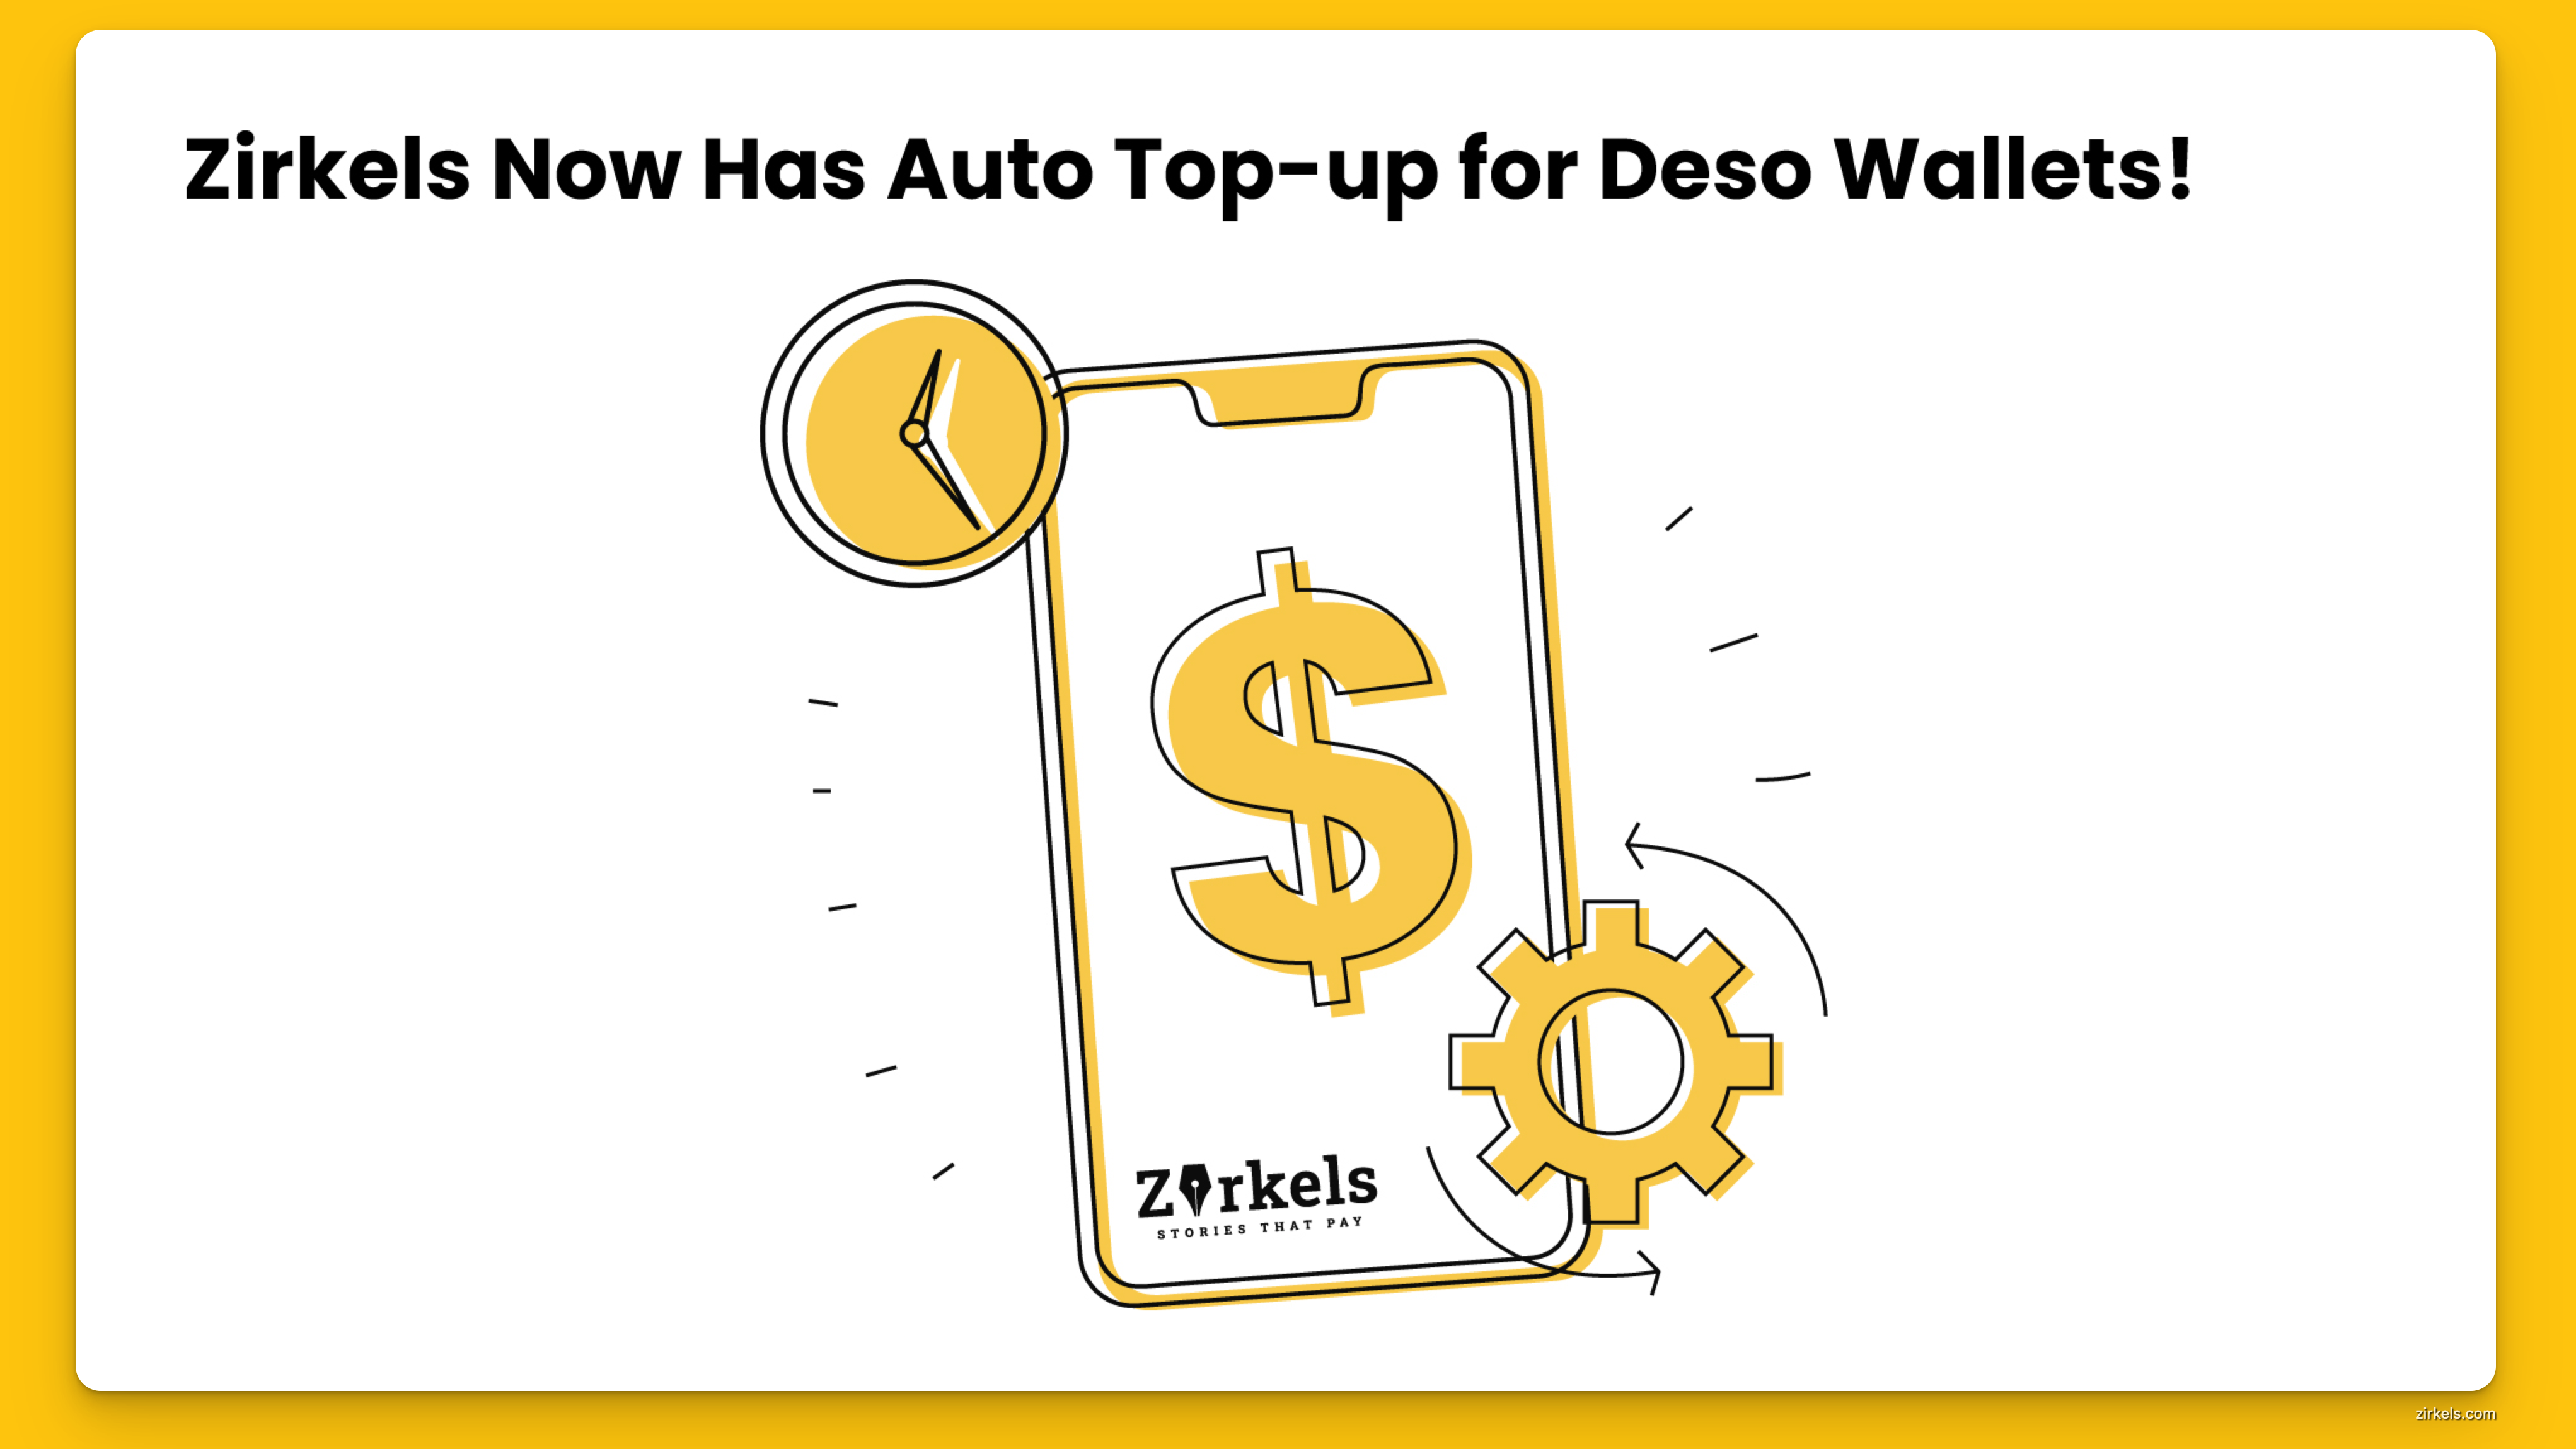 Keep Your Deso Wallet Topped Up on Autopilot Thanks to Zirkels!